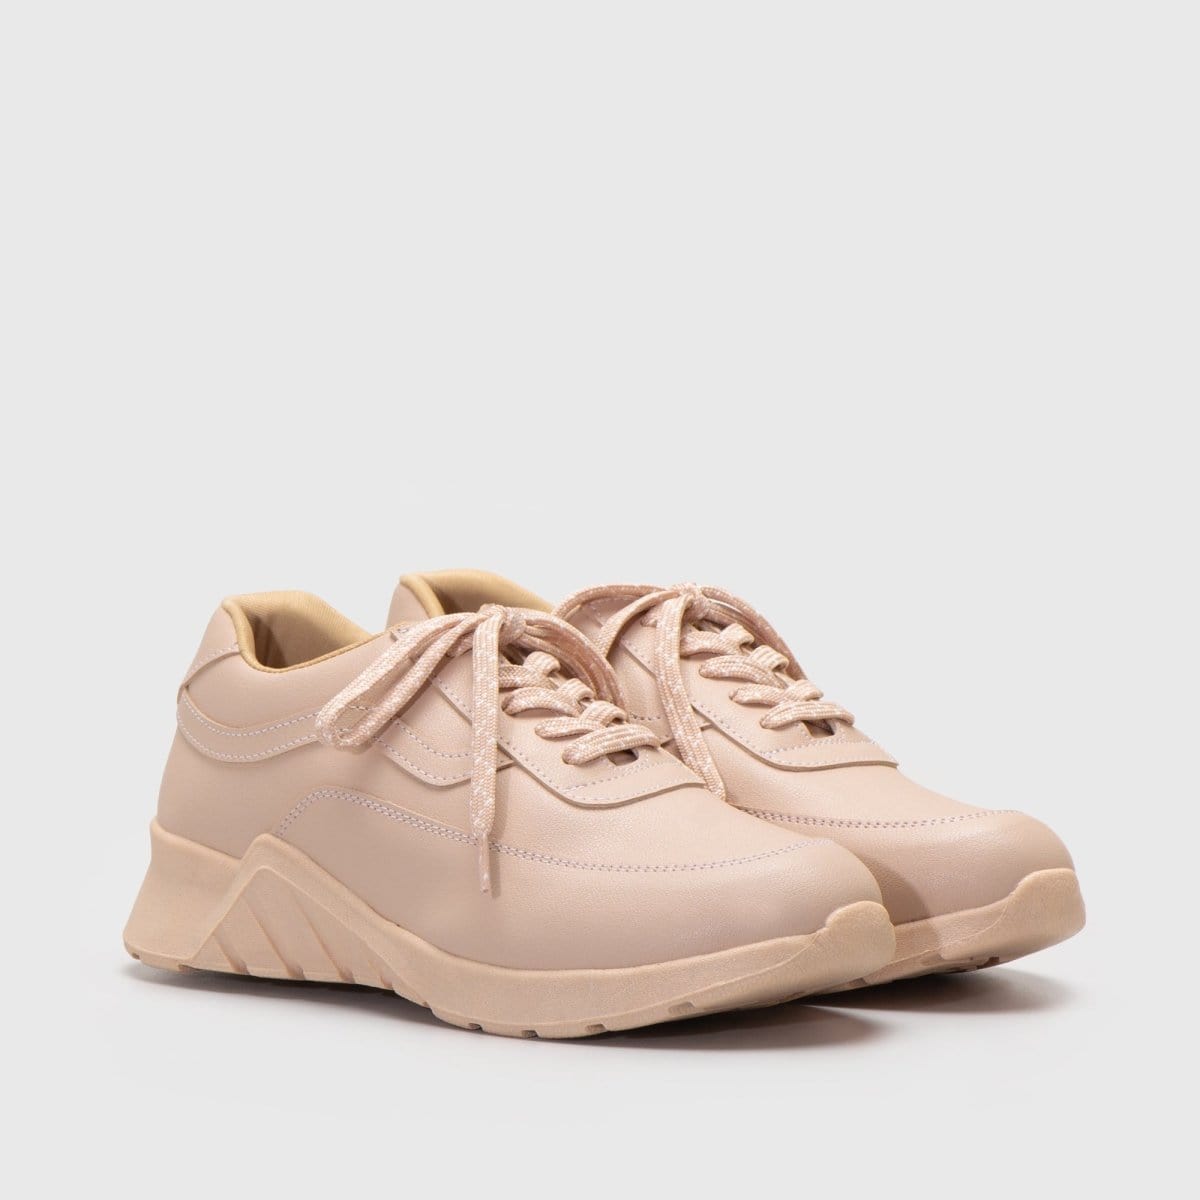 Adorable Projects Official Sneakers 43 / Peach Kikimora Sneakers Peach